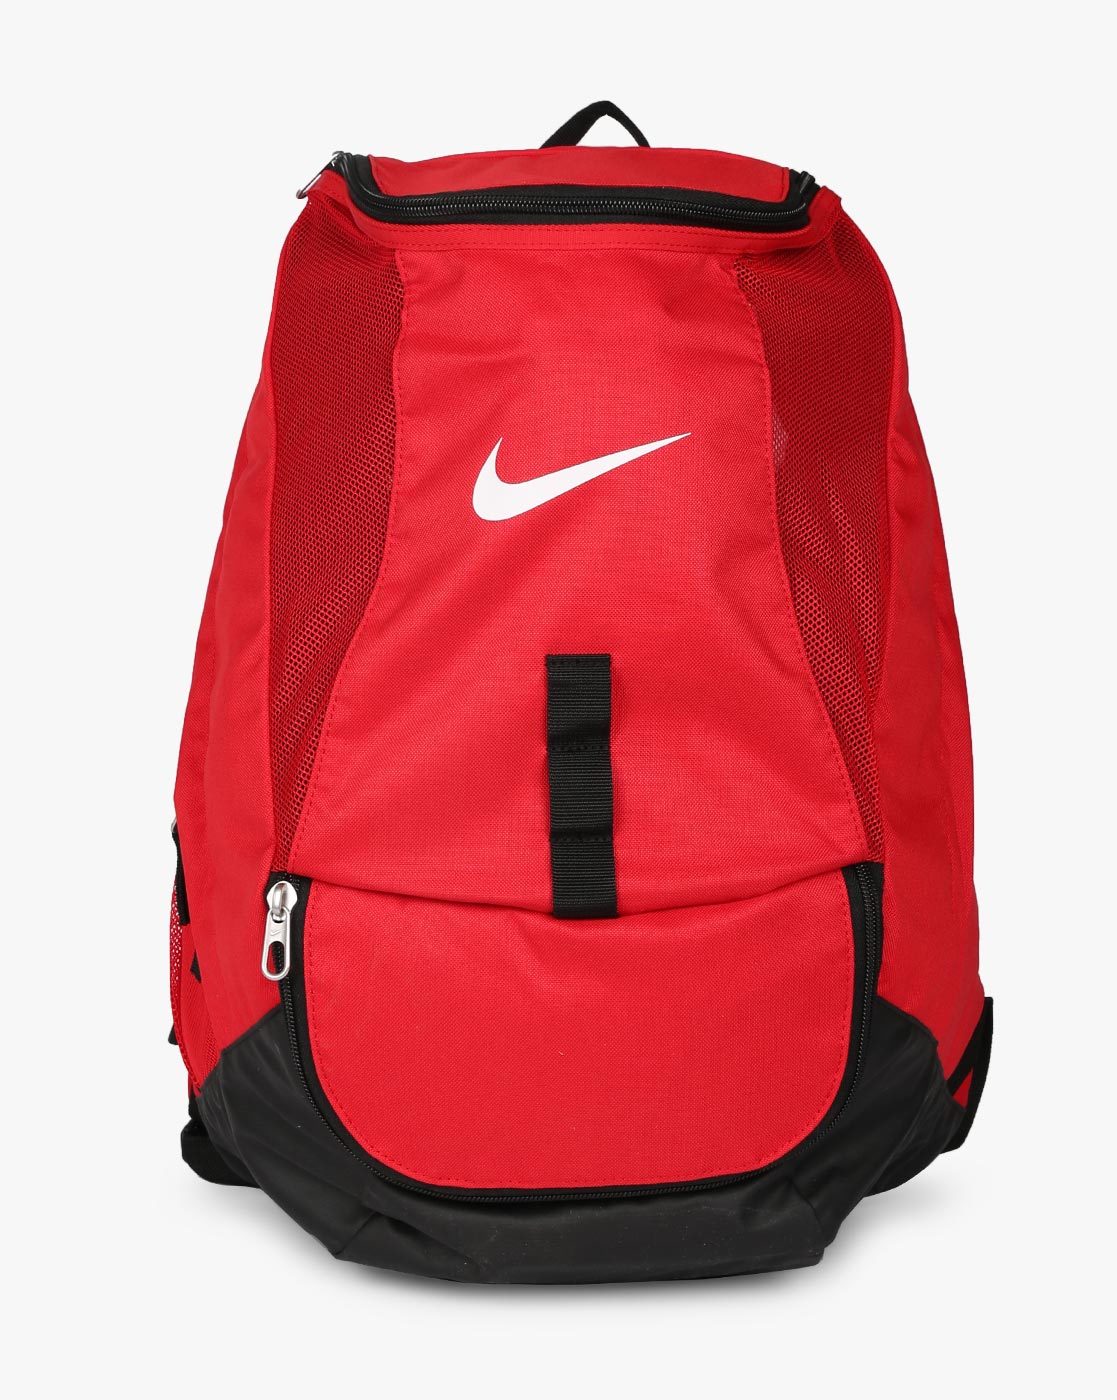 Nike Academy Team Backpack 2.3 - University Red/University Red/White - Bags  & Luggage |